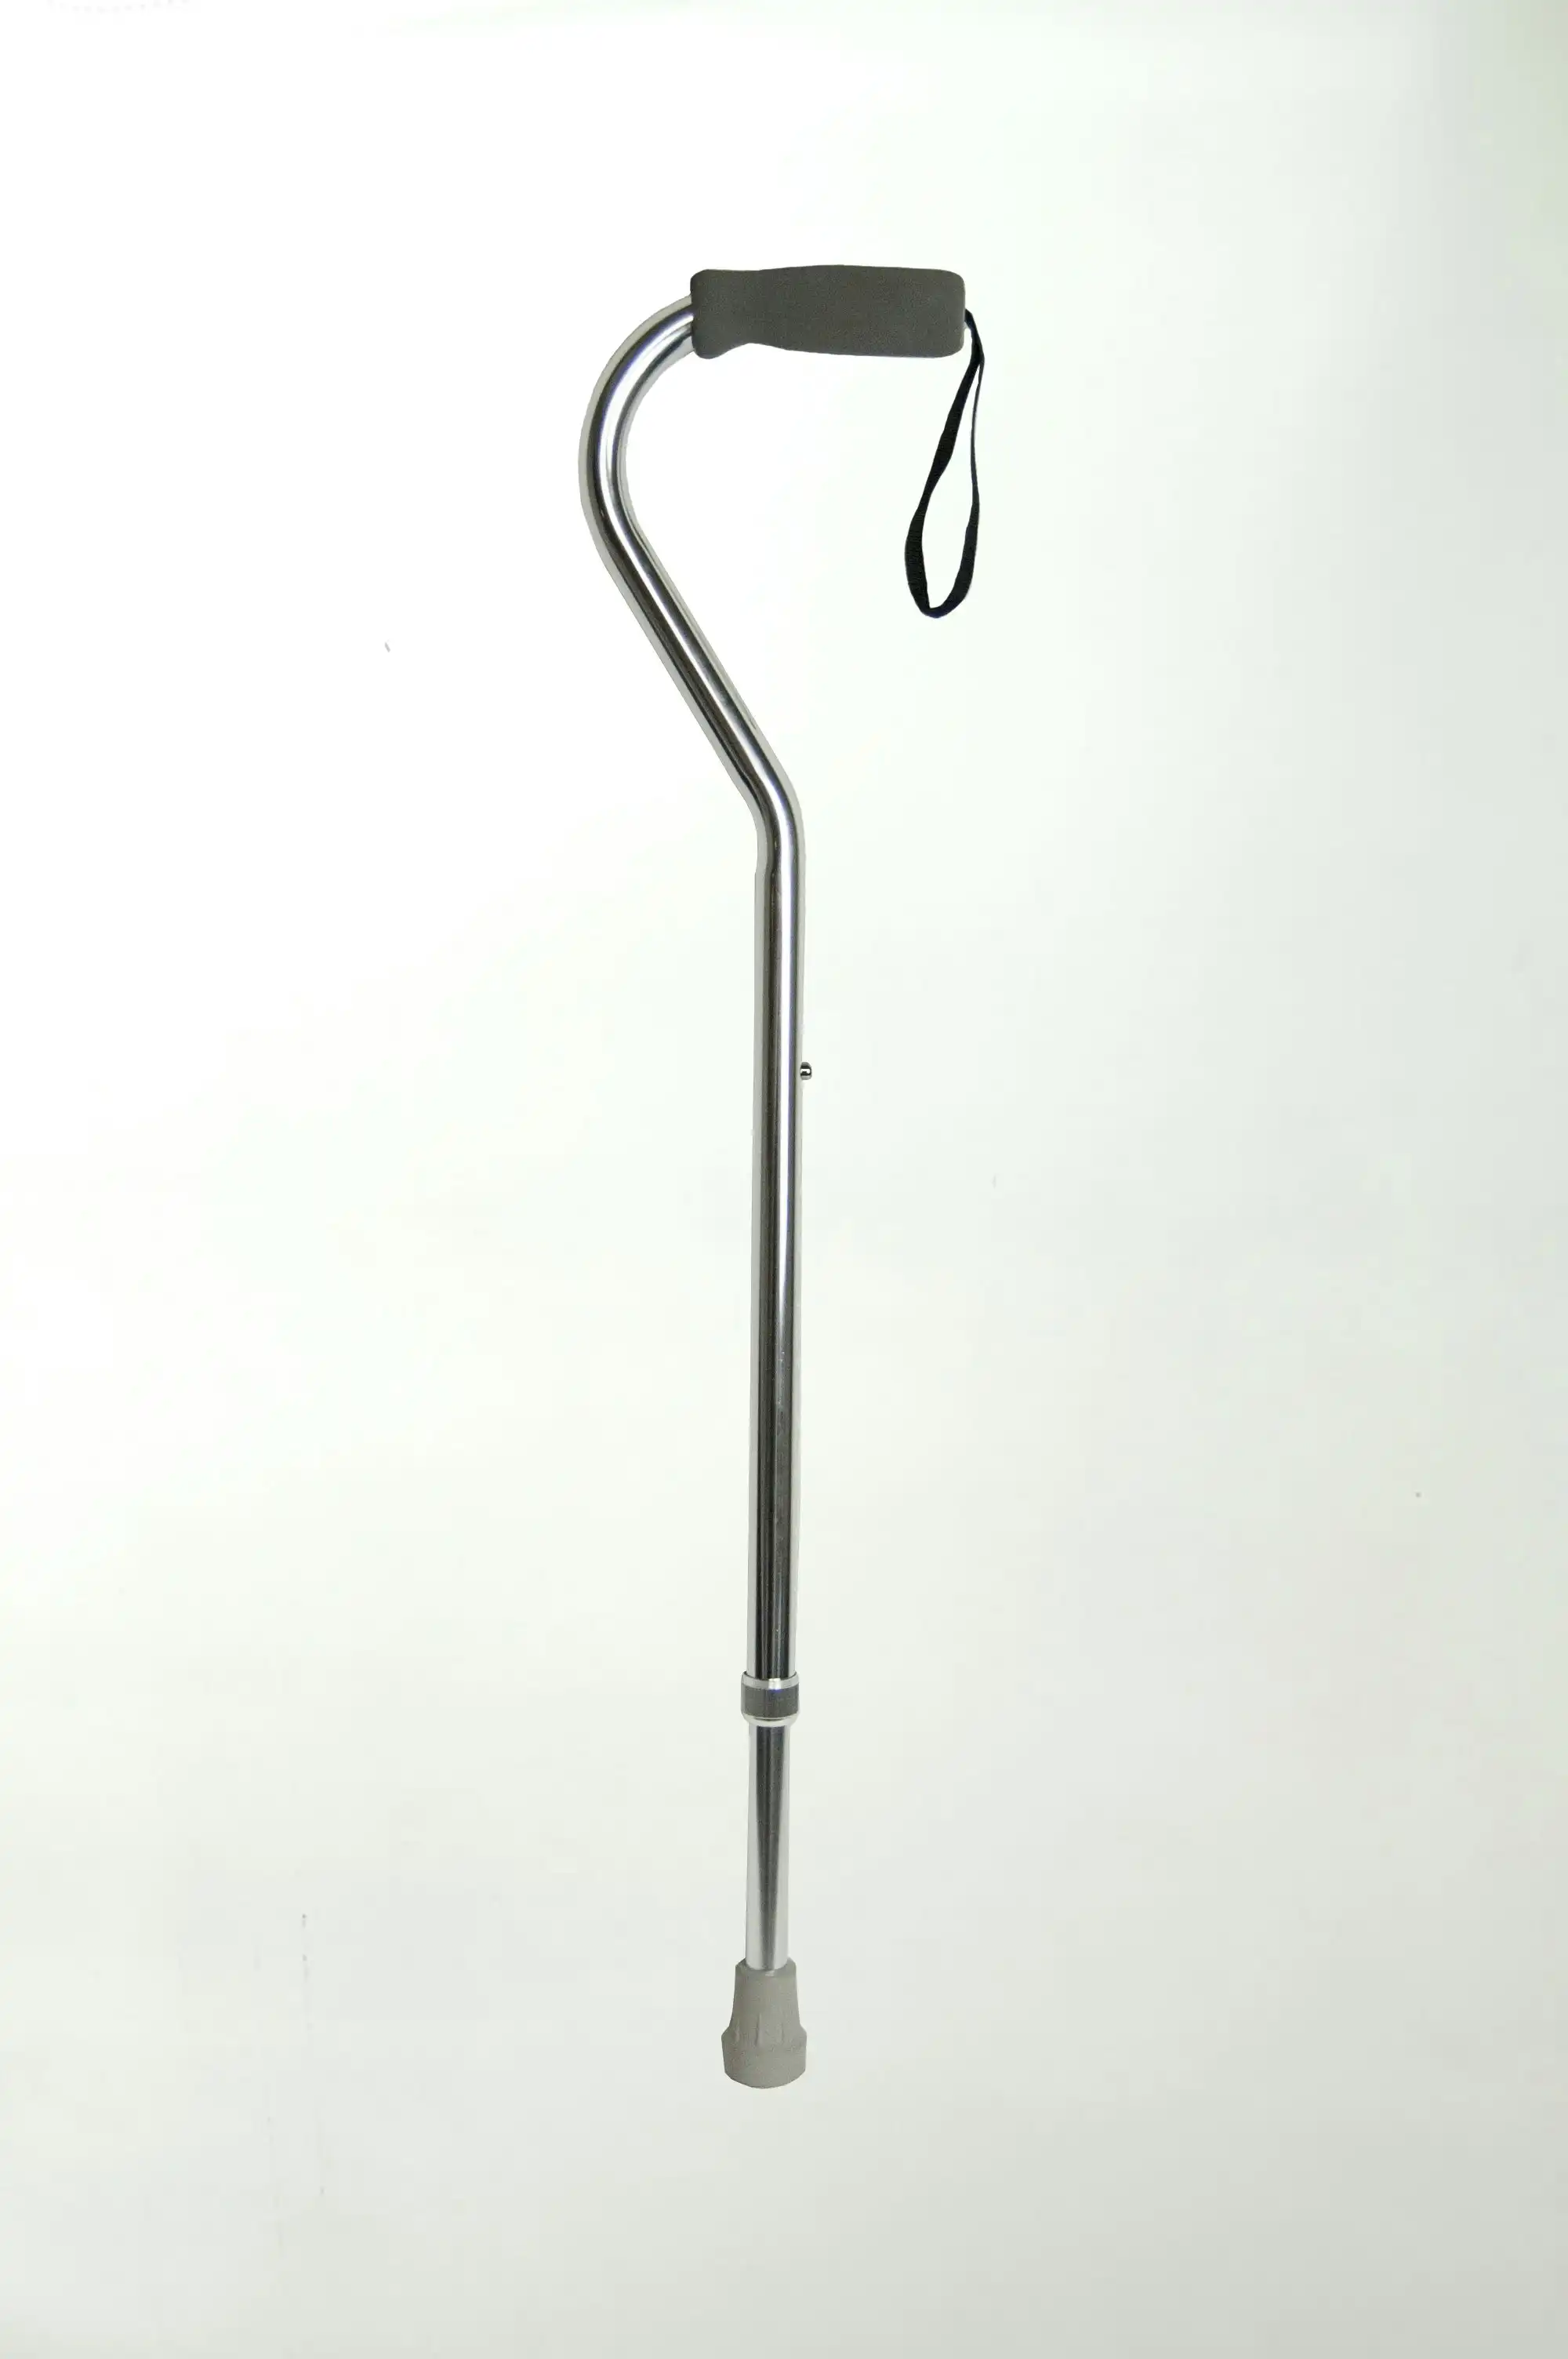 Livingstone Walking Stick Swan Neck Aluminium Silver Adjustable 78-100 cm Withstand up to 100 kg